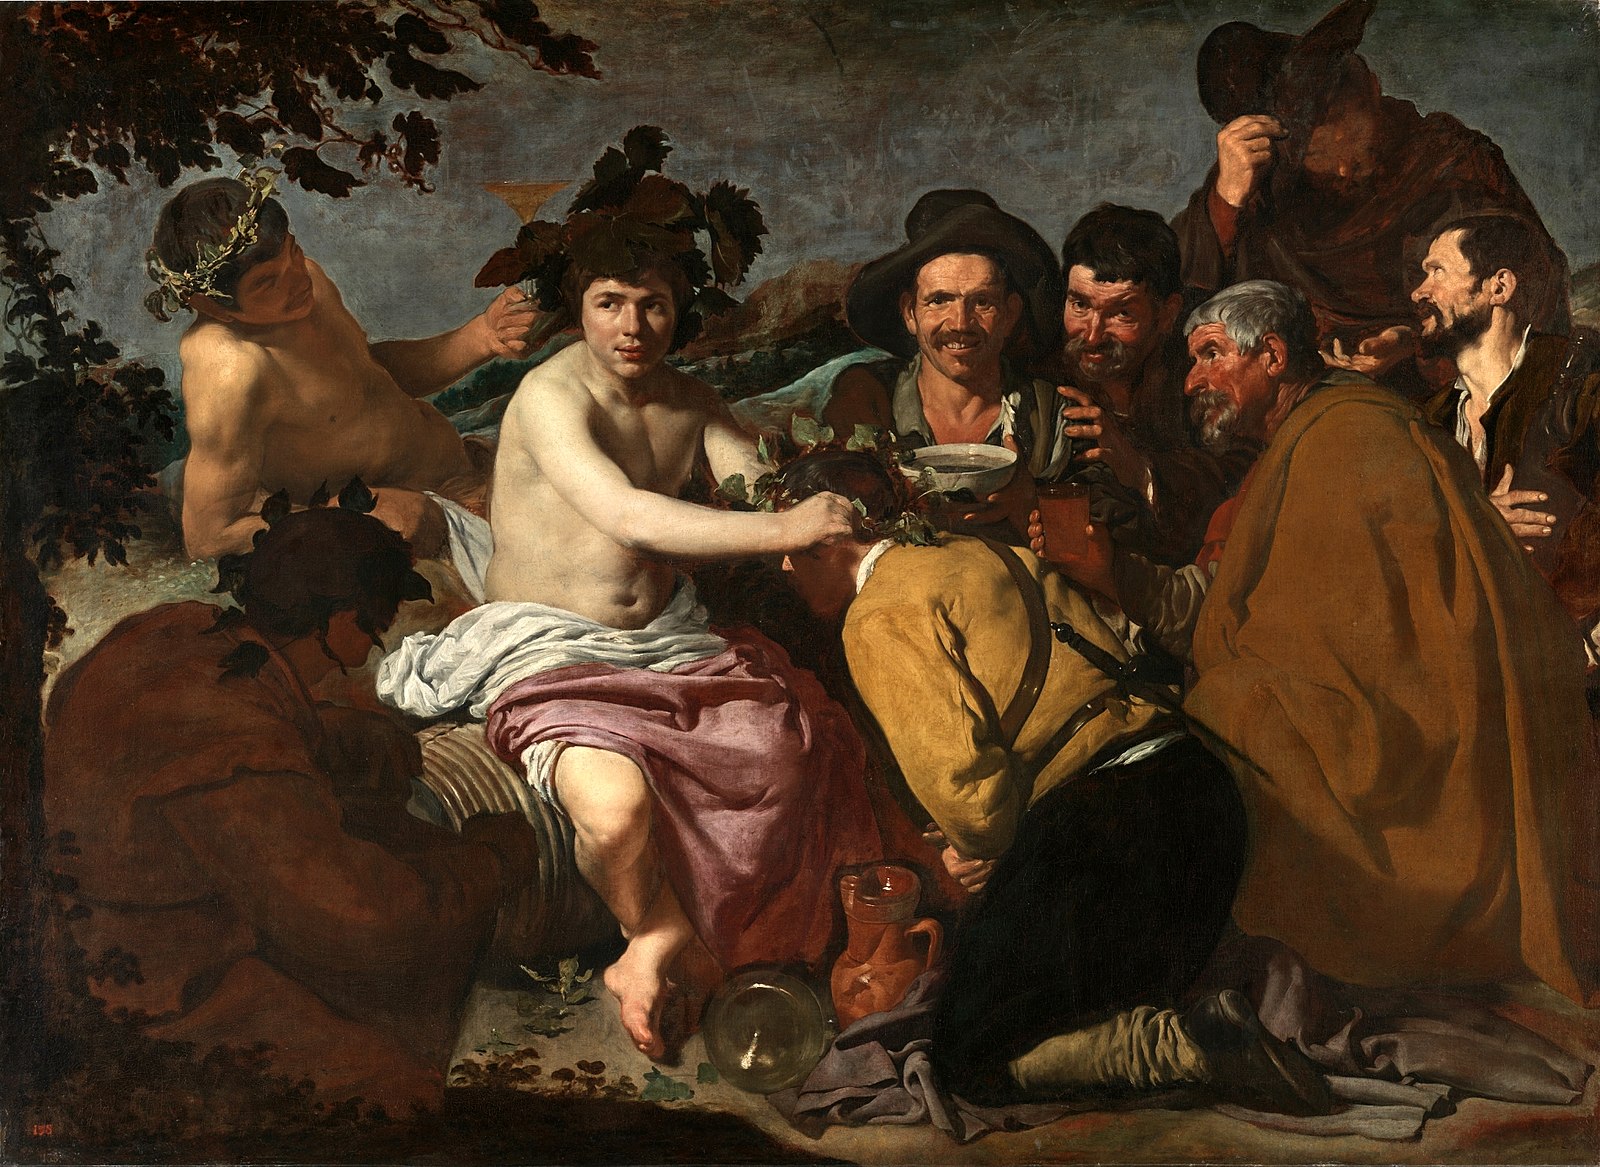 Painting of men gathered outside drinking wine